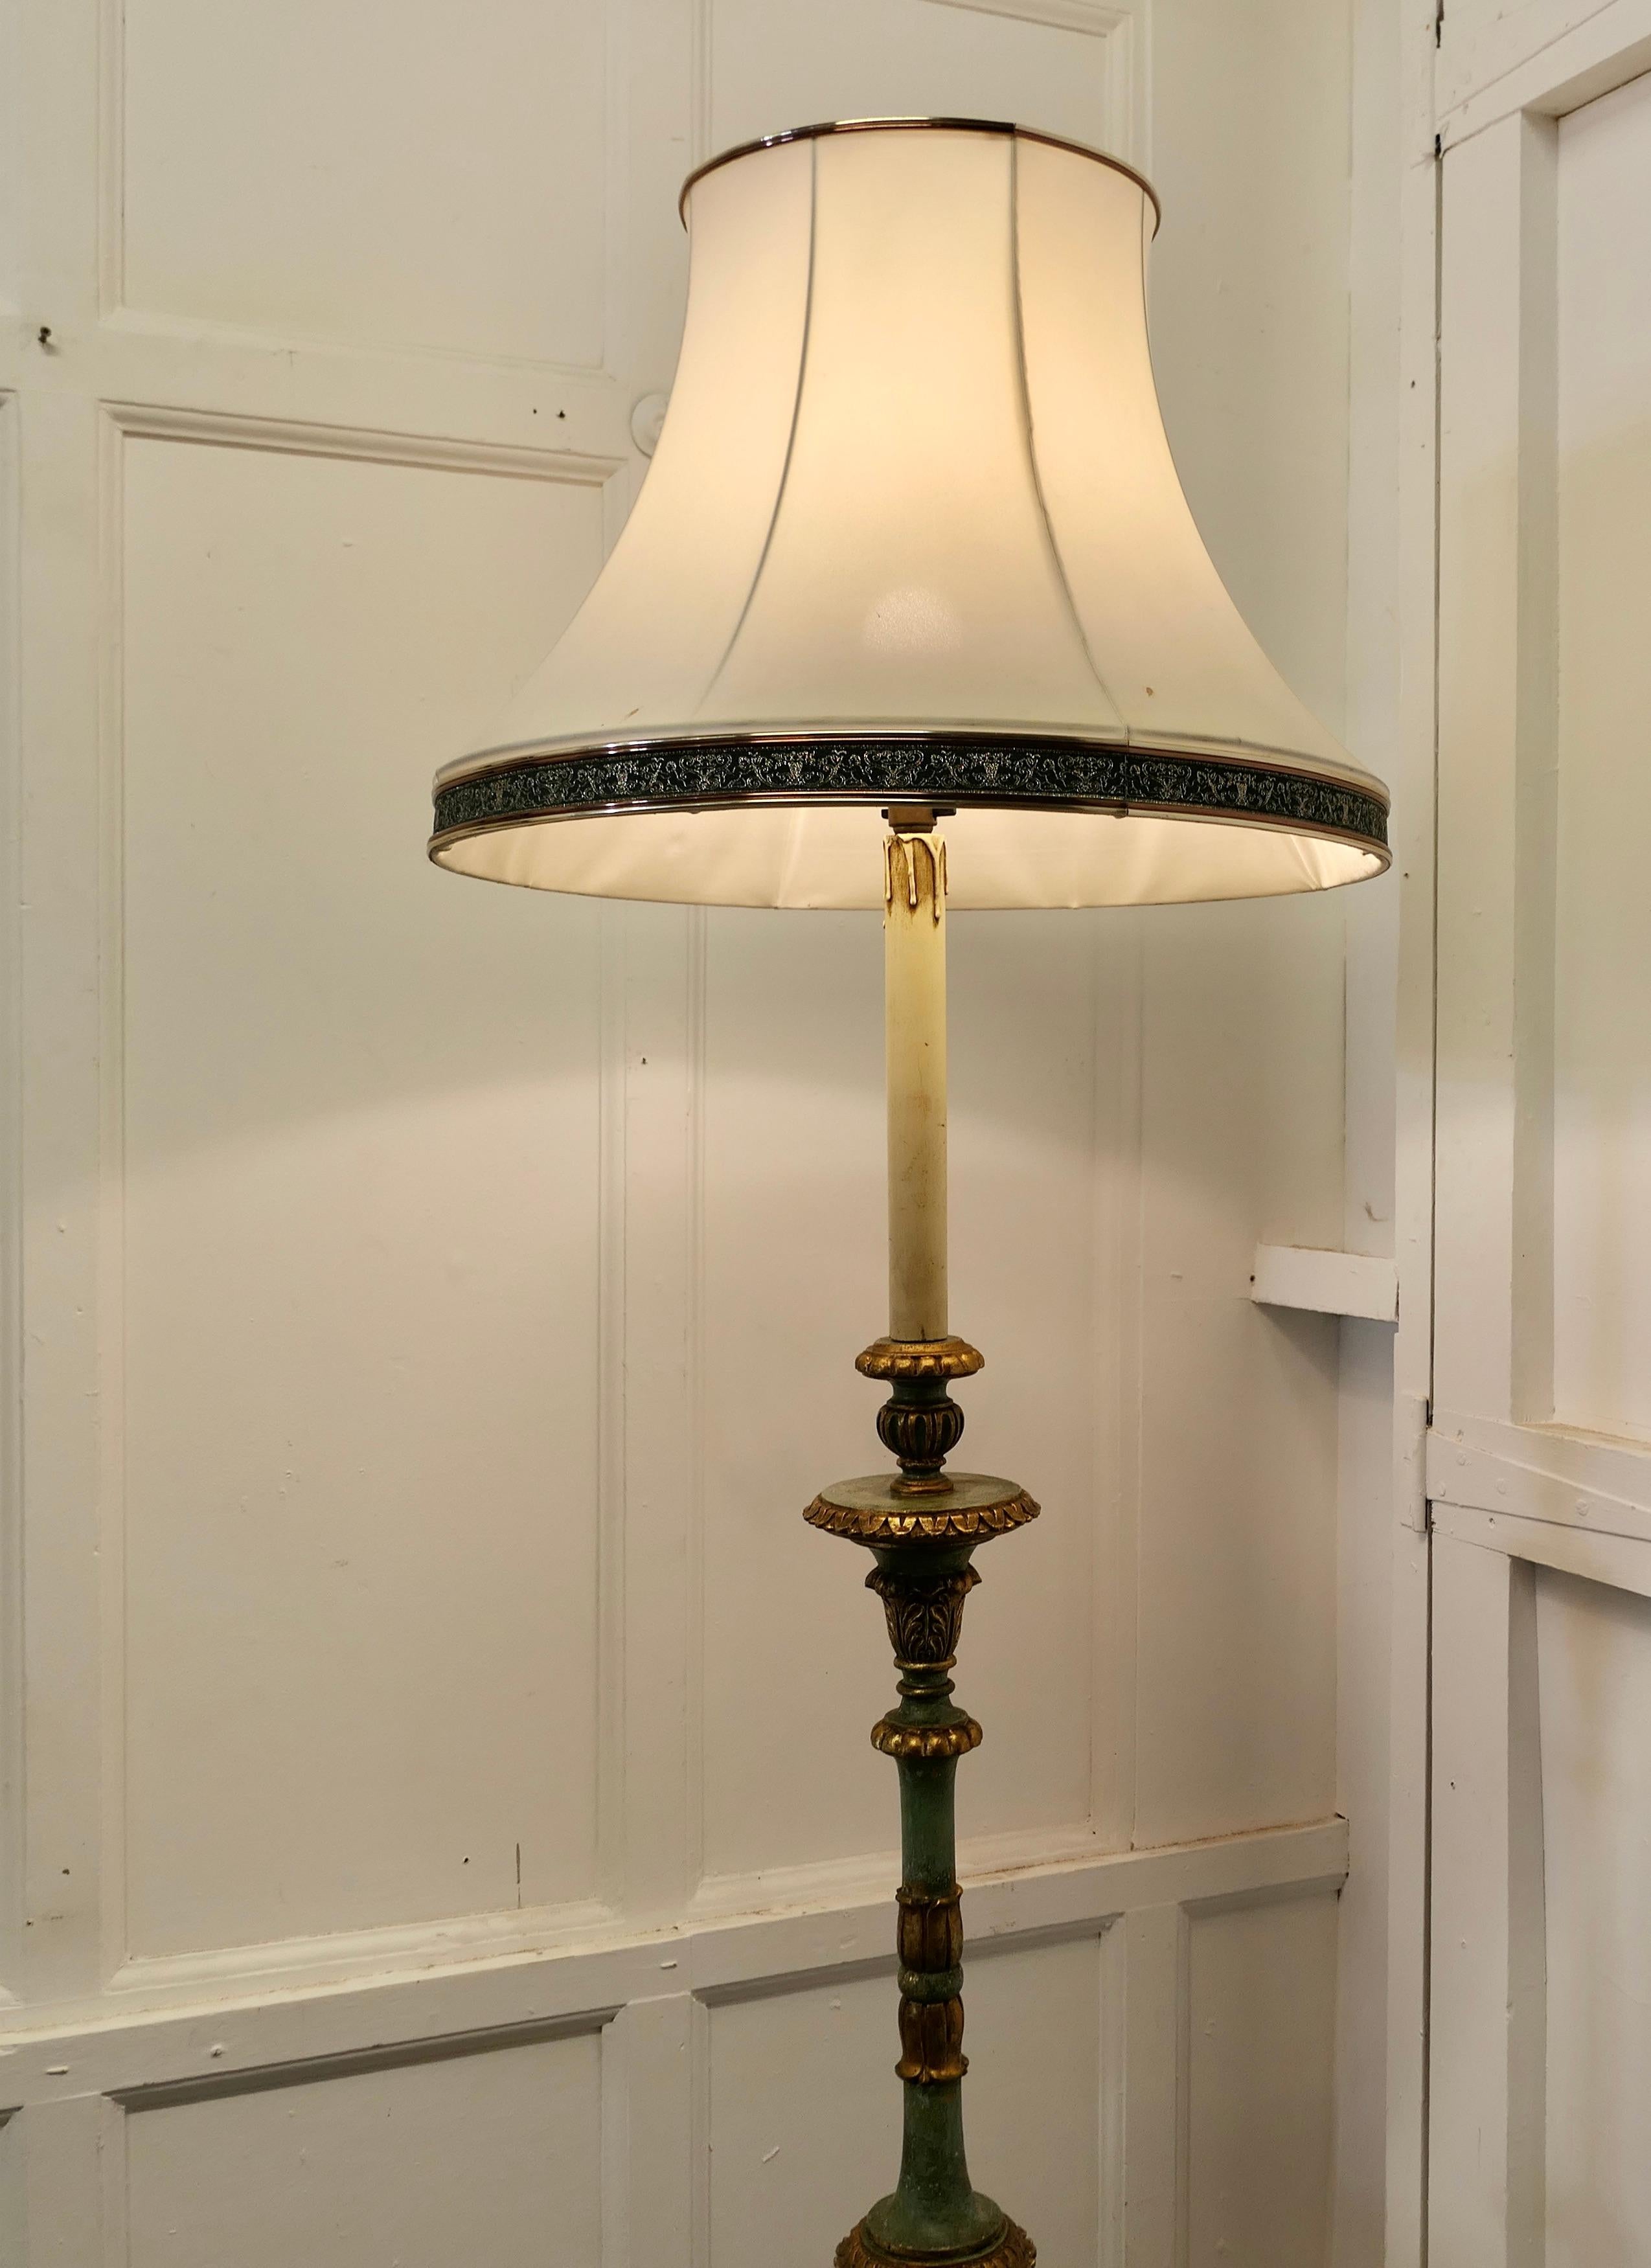 Tall painted green and giltwood floor standing or standard lamp

This is a very attractive piece in age darkened colours of moss green and gold, the lamp stands on a decorative turned and carved wooden base and column, the wiring seems to be new